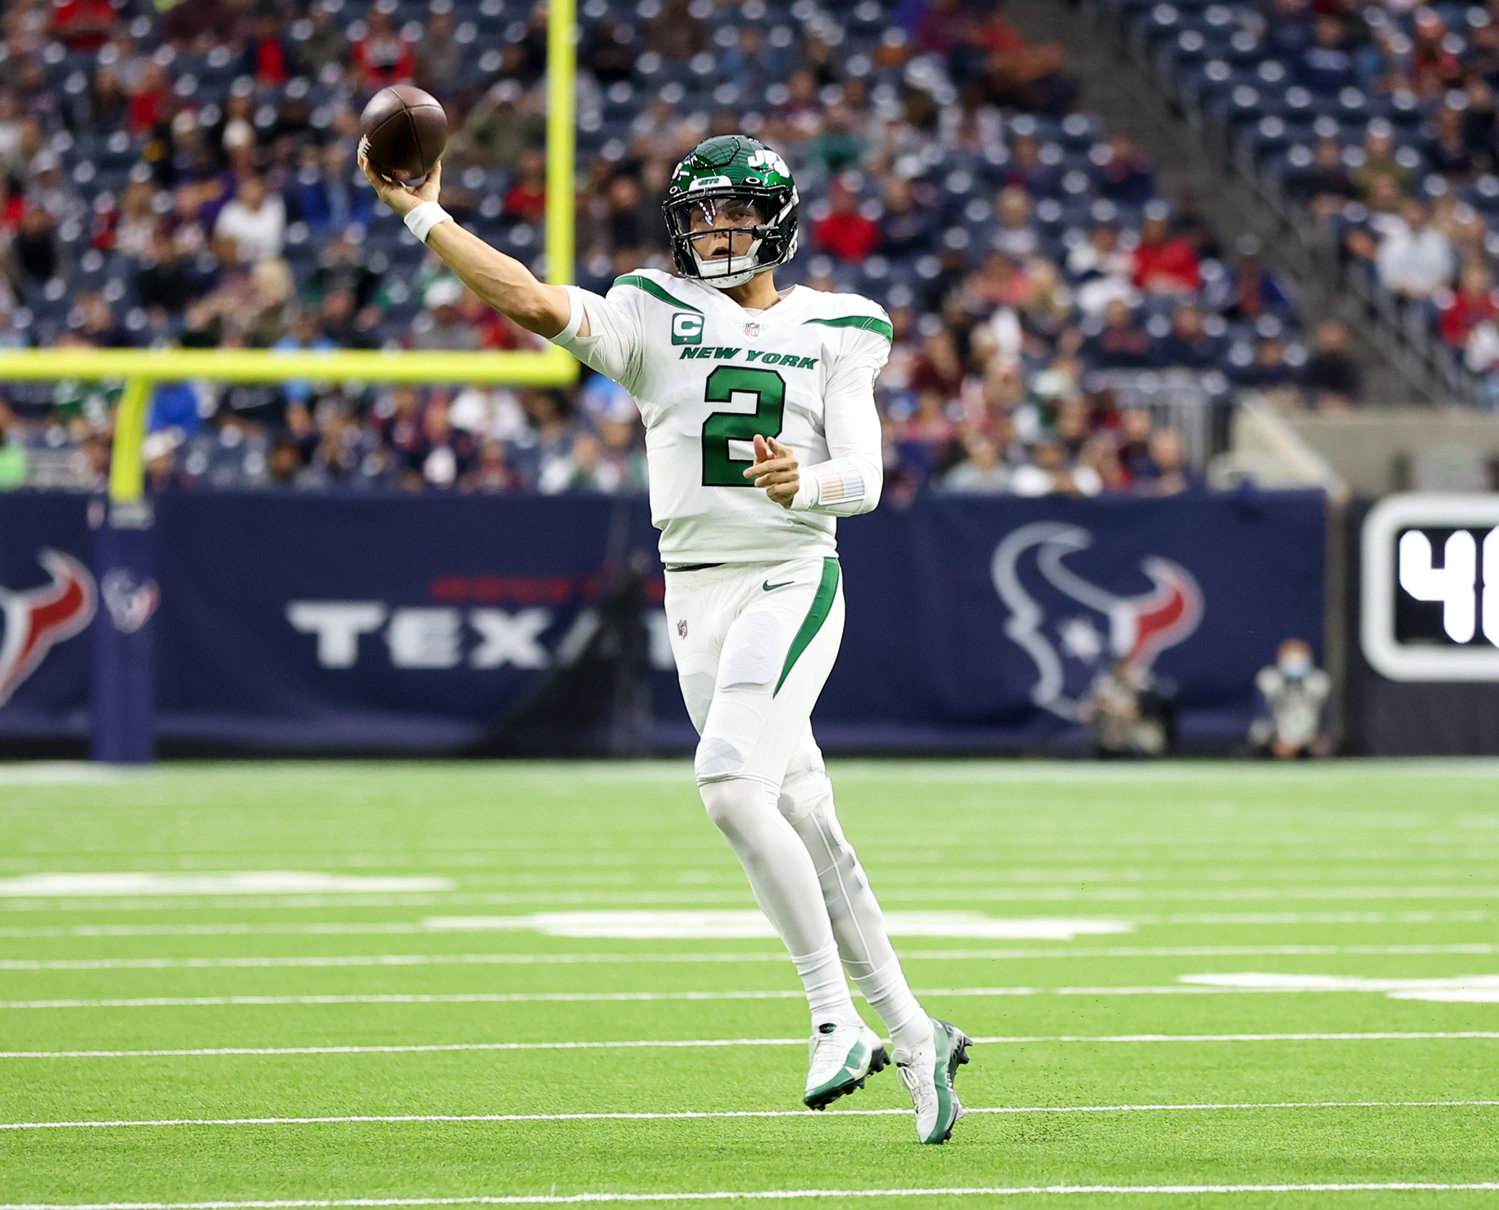 New York Jets quarterback Zach Wilson (2) passes the ball during an NFL game between the Houston Texans and the New York Jets on November 28, 2021 in Houston, Texas. The Jets won, 21-14